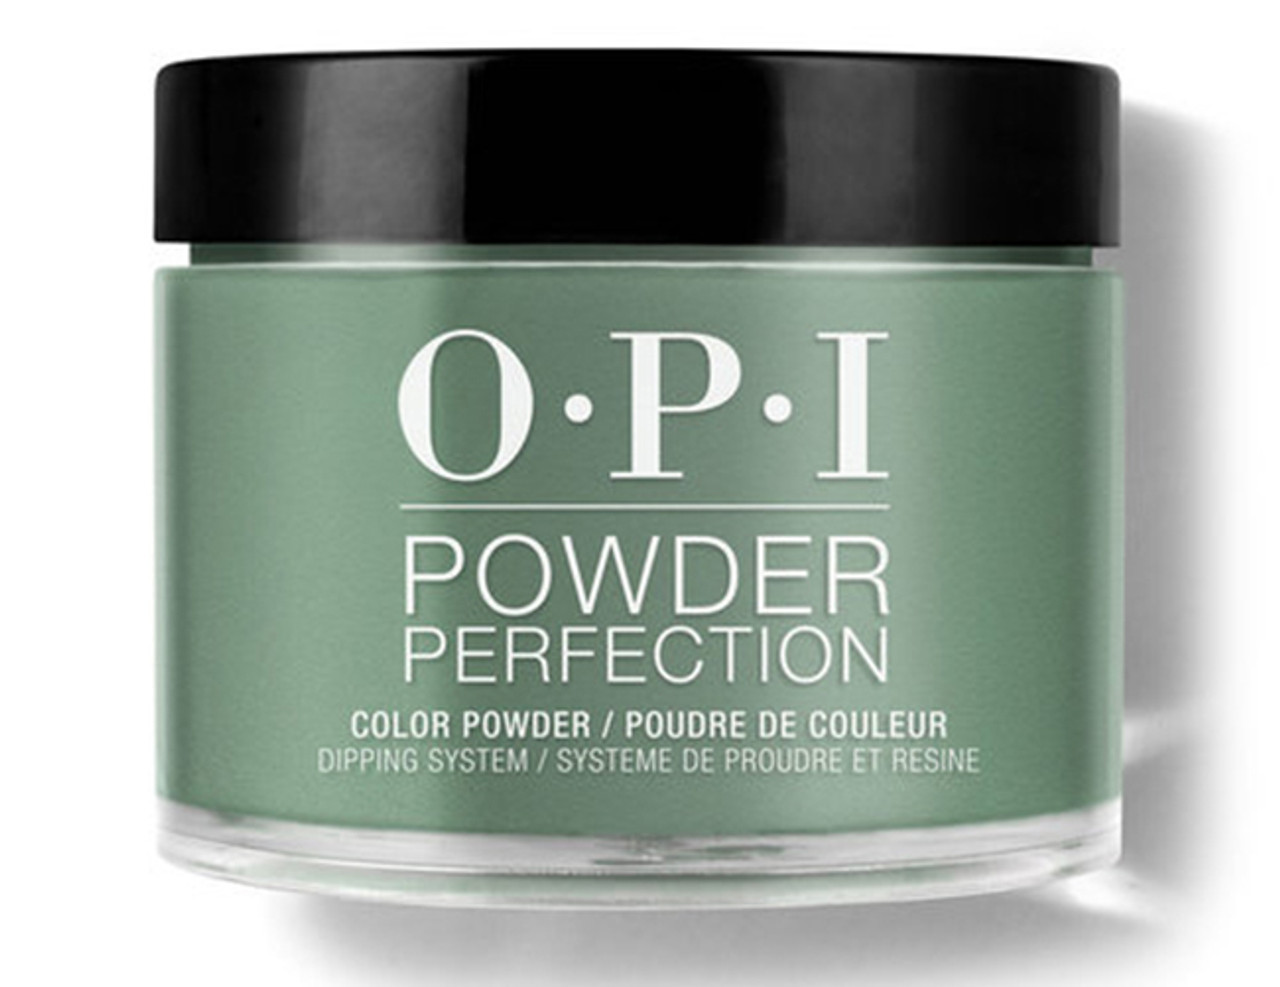 OPI Dipping Powder Perfection Stay Off the Lawn!! - 1.5 oz / 43 G